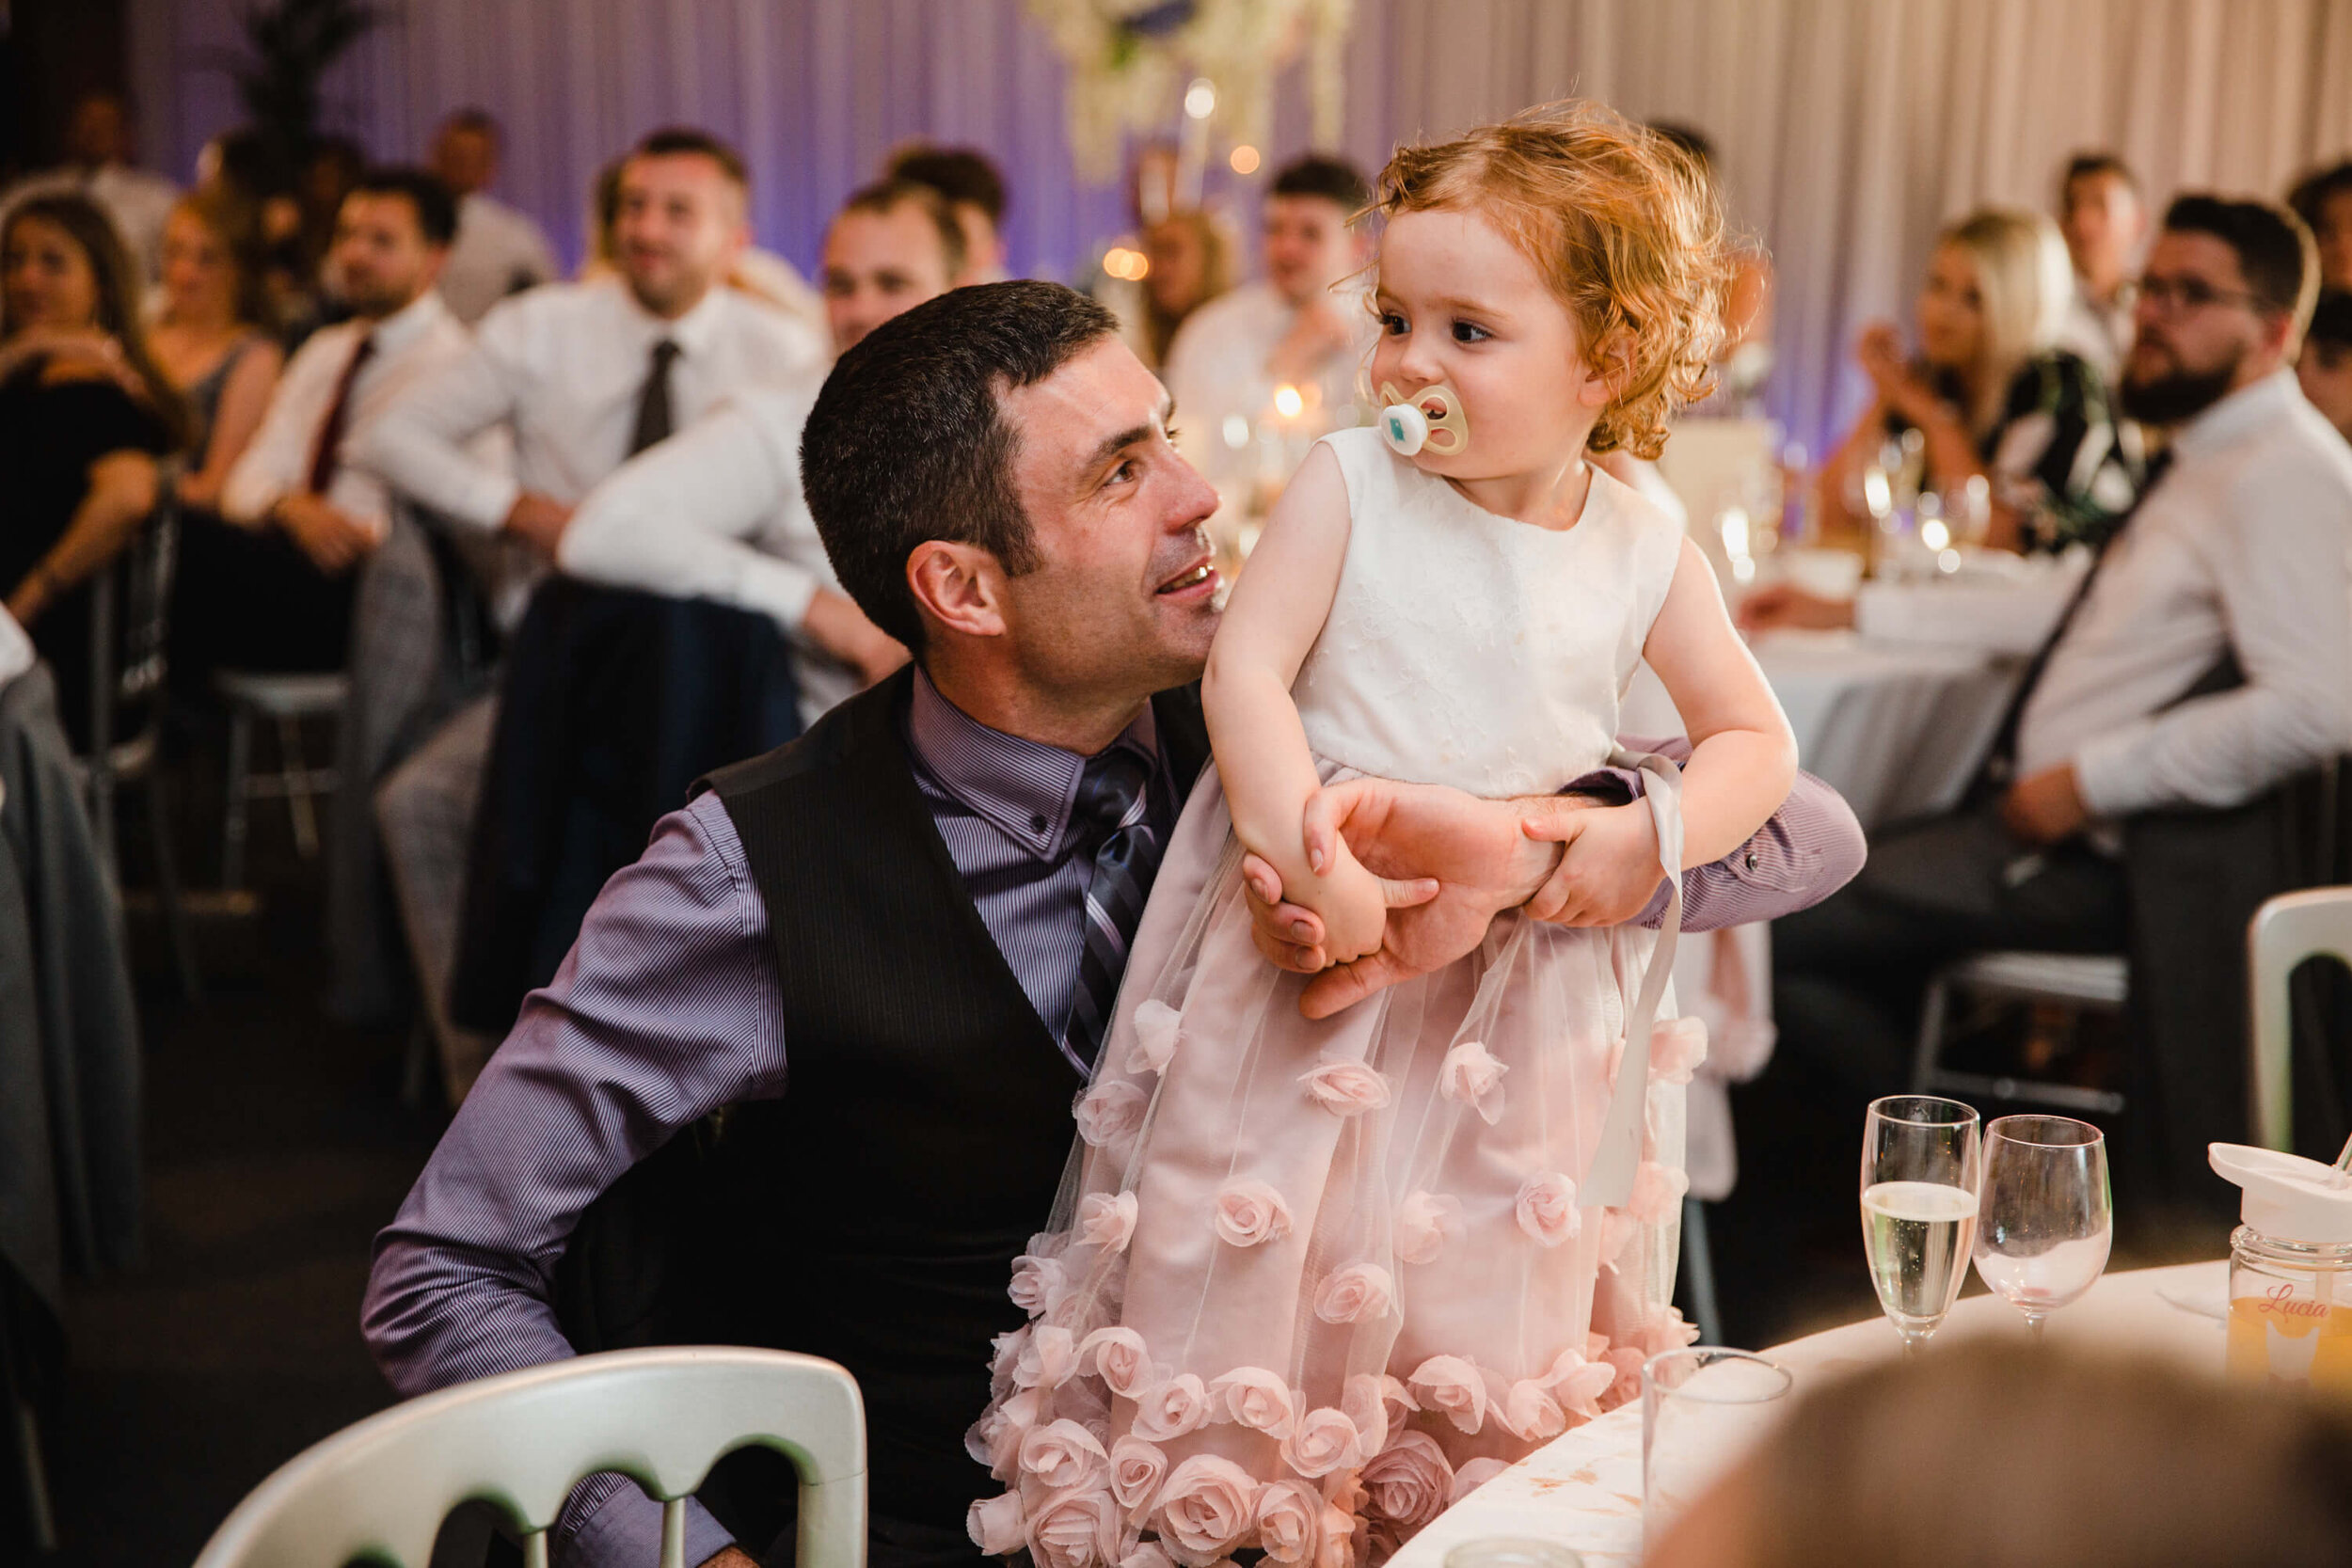 flower girl stood on fathers lap during speeches